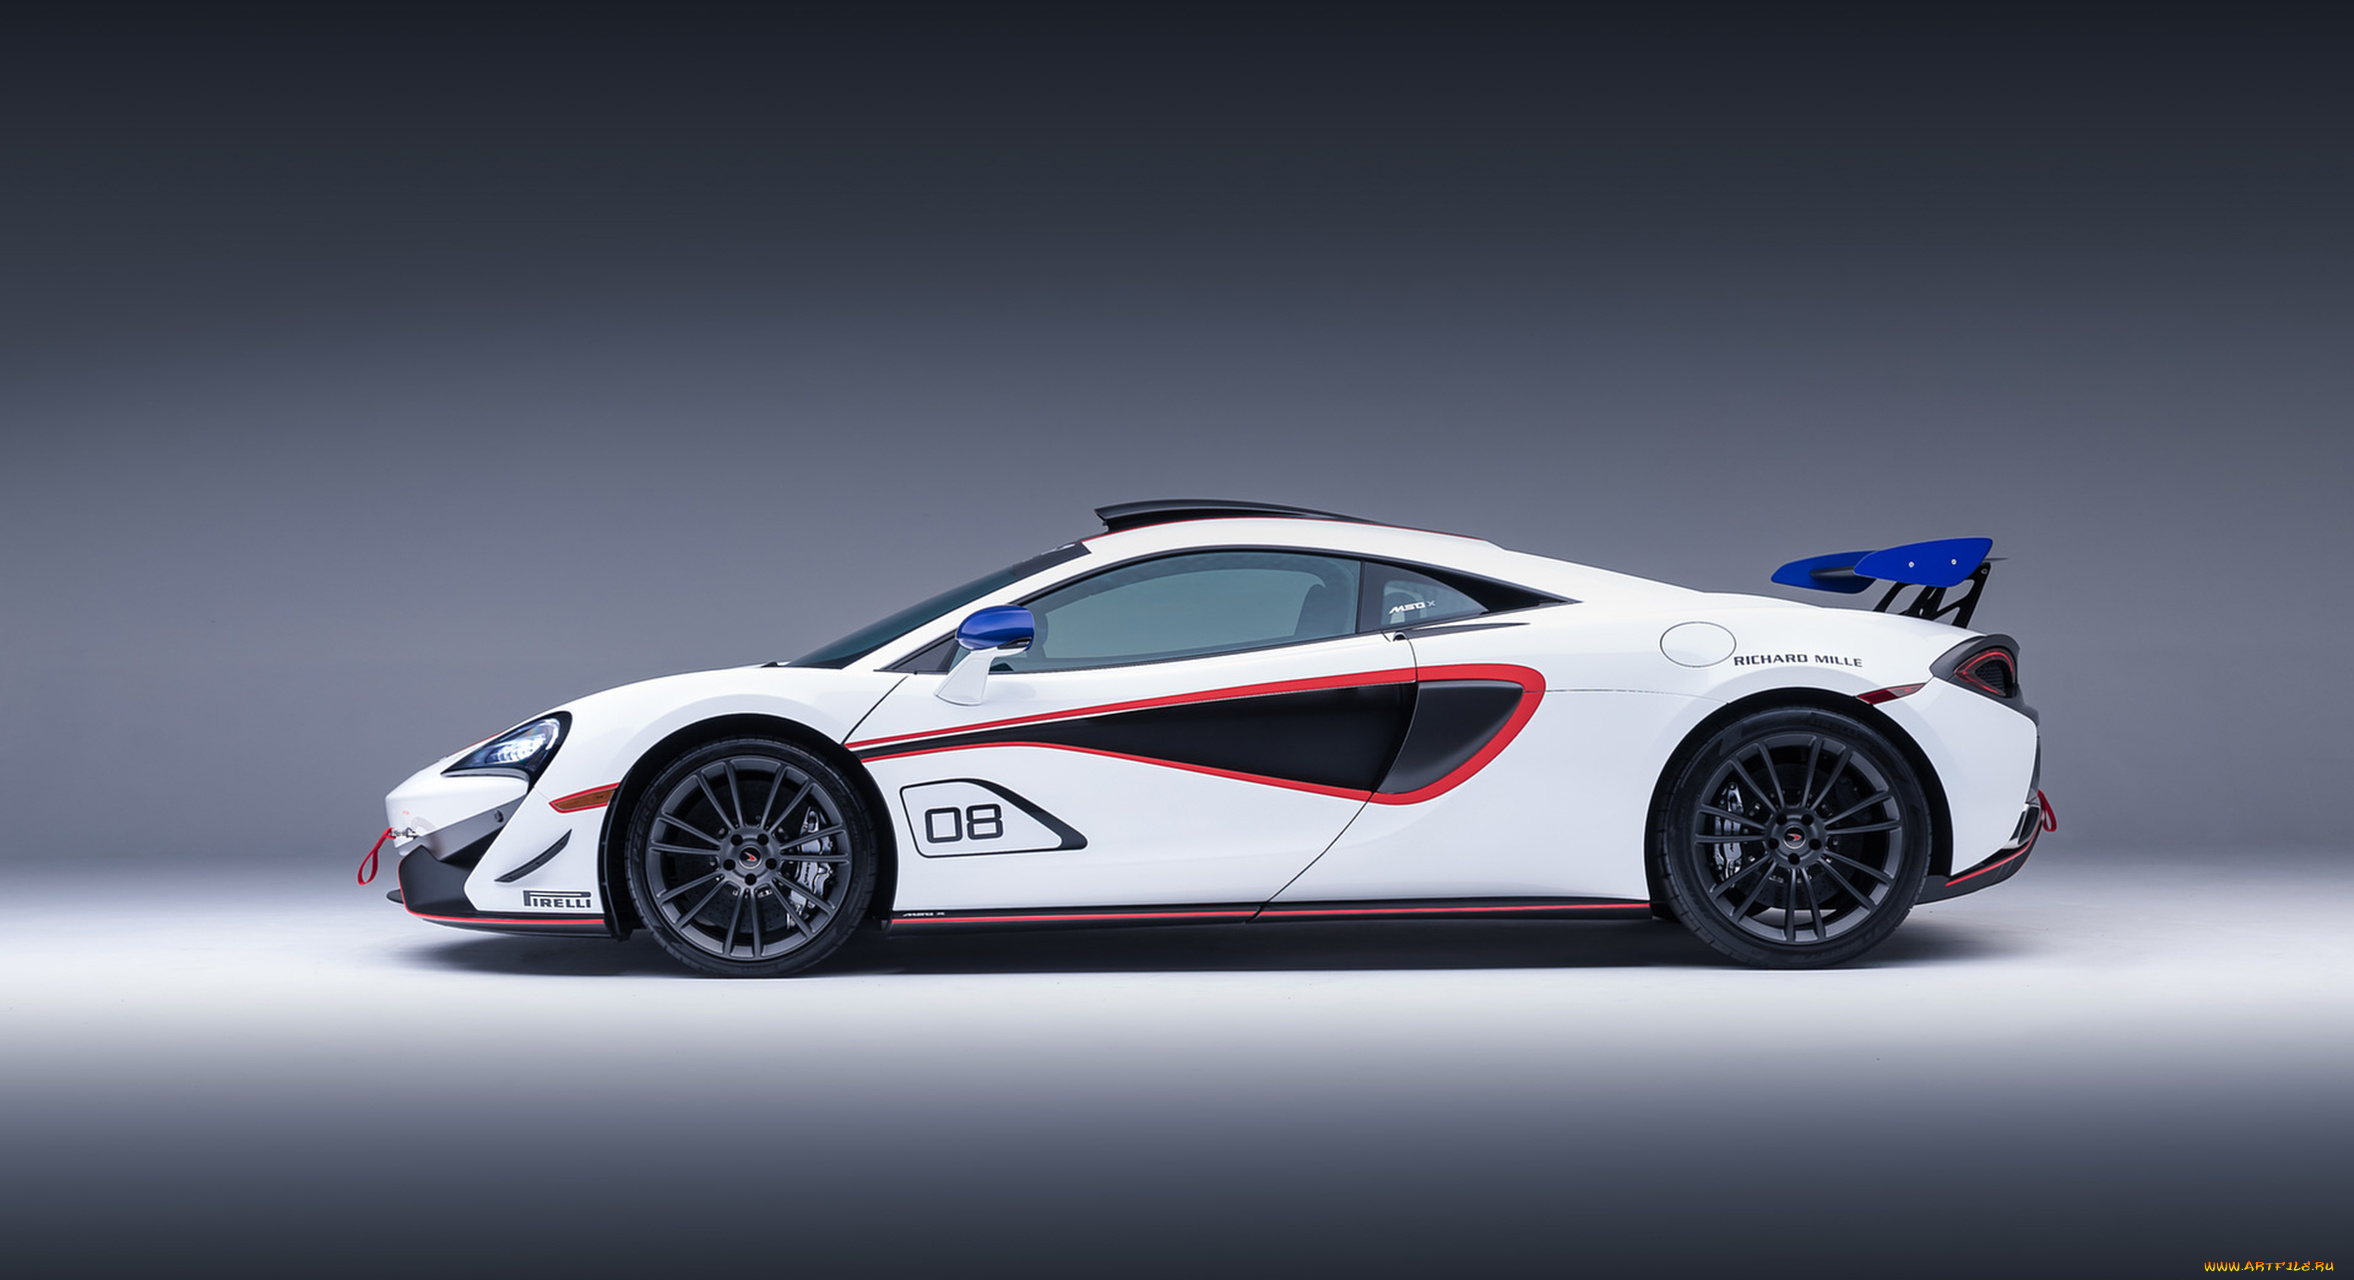 mclaren, 570s, gt4-mso, x, no8, white, red, and, blue, accents, 2018, автомобили, mclaren, 570s, gt4-mso, x, no8, white, red, blue, accents, 2018